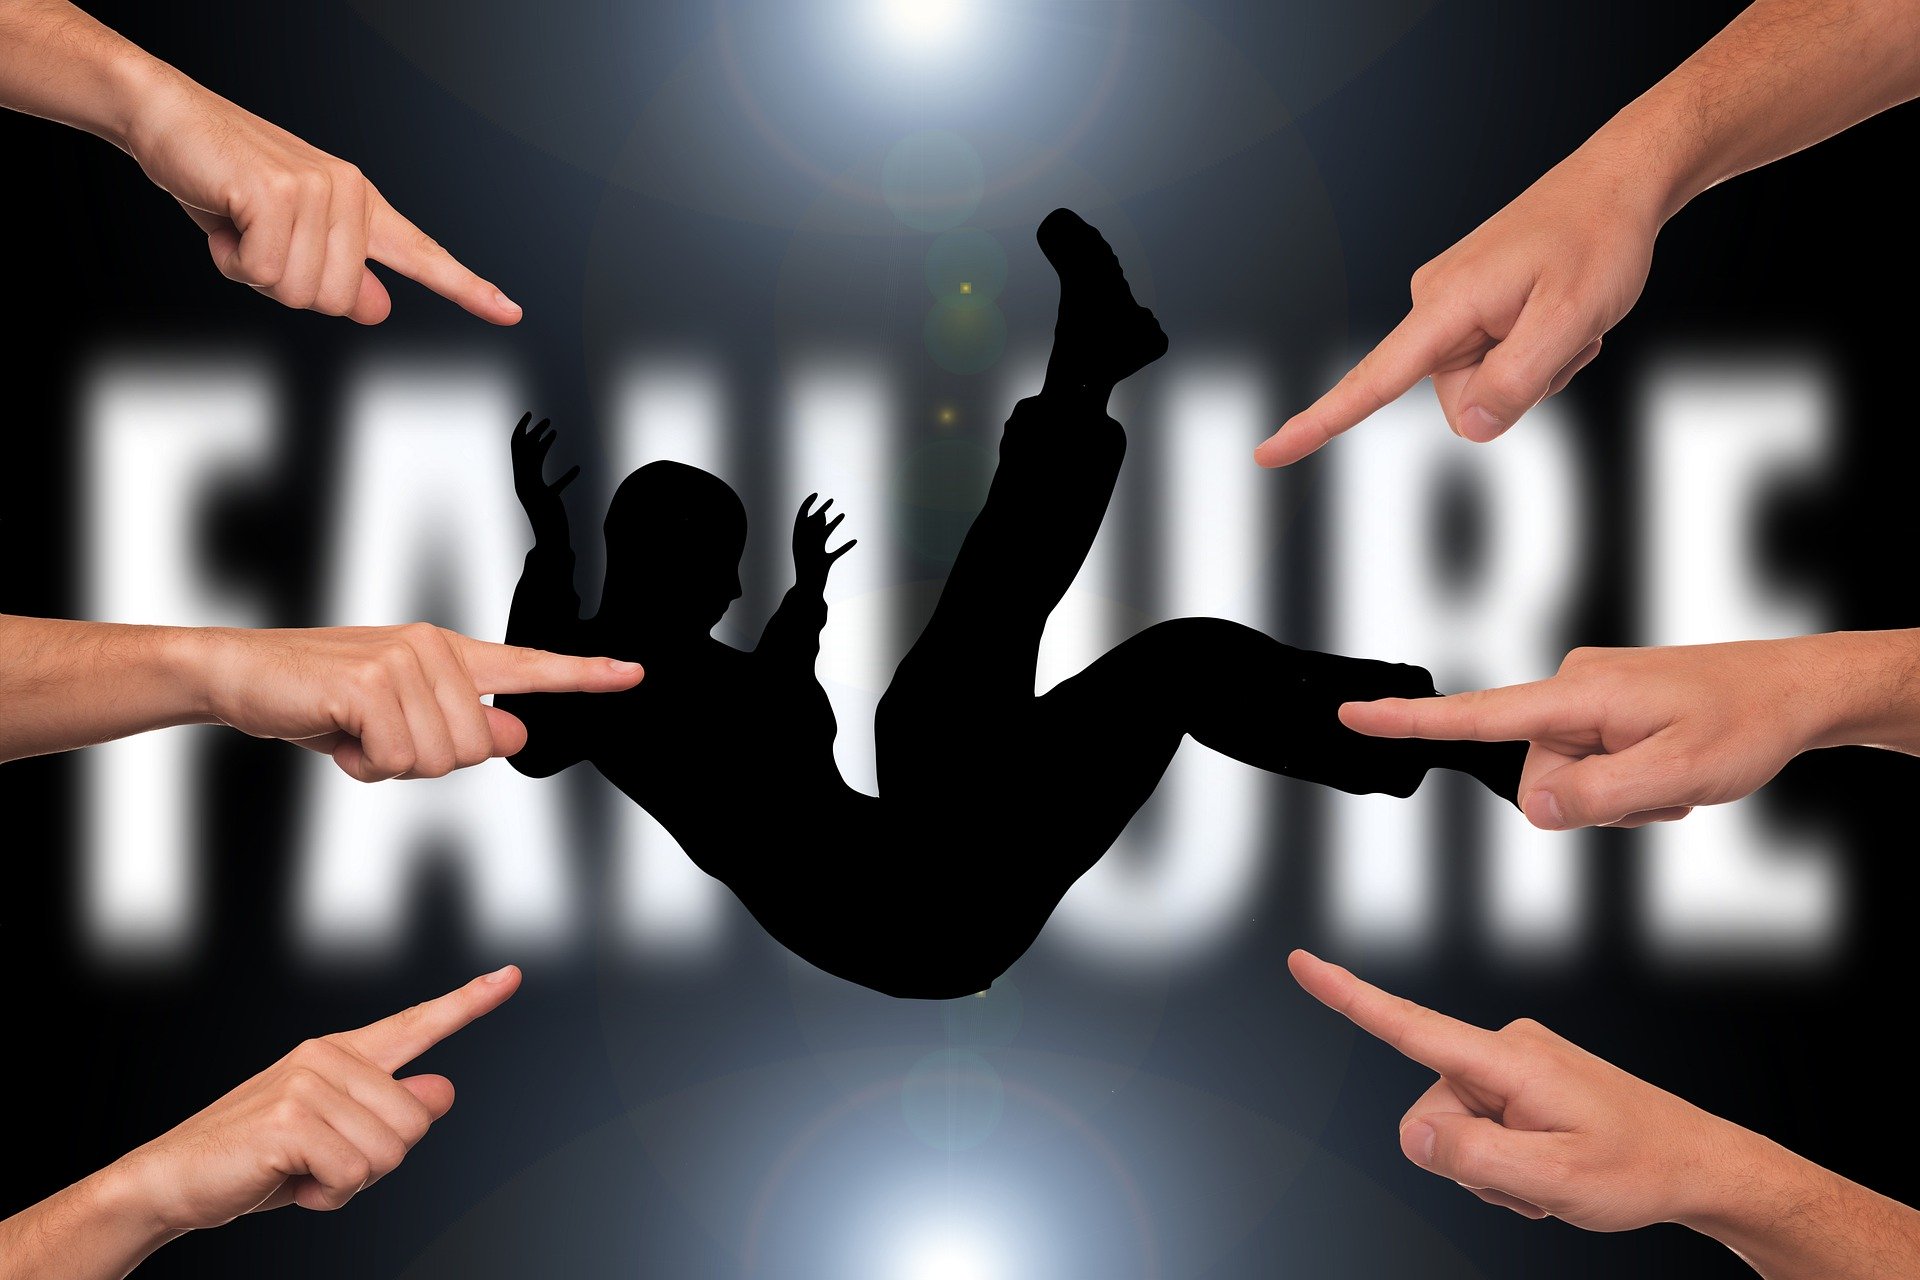 This Conundrum is about someone who trips you, tortures you, and comforts you in time of need. The picture is of a person falling and a bunch of fingers pointing indicating failure.